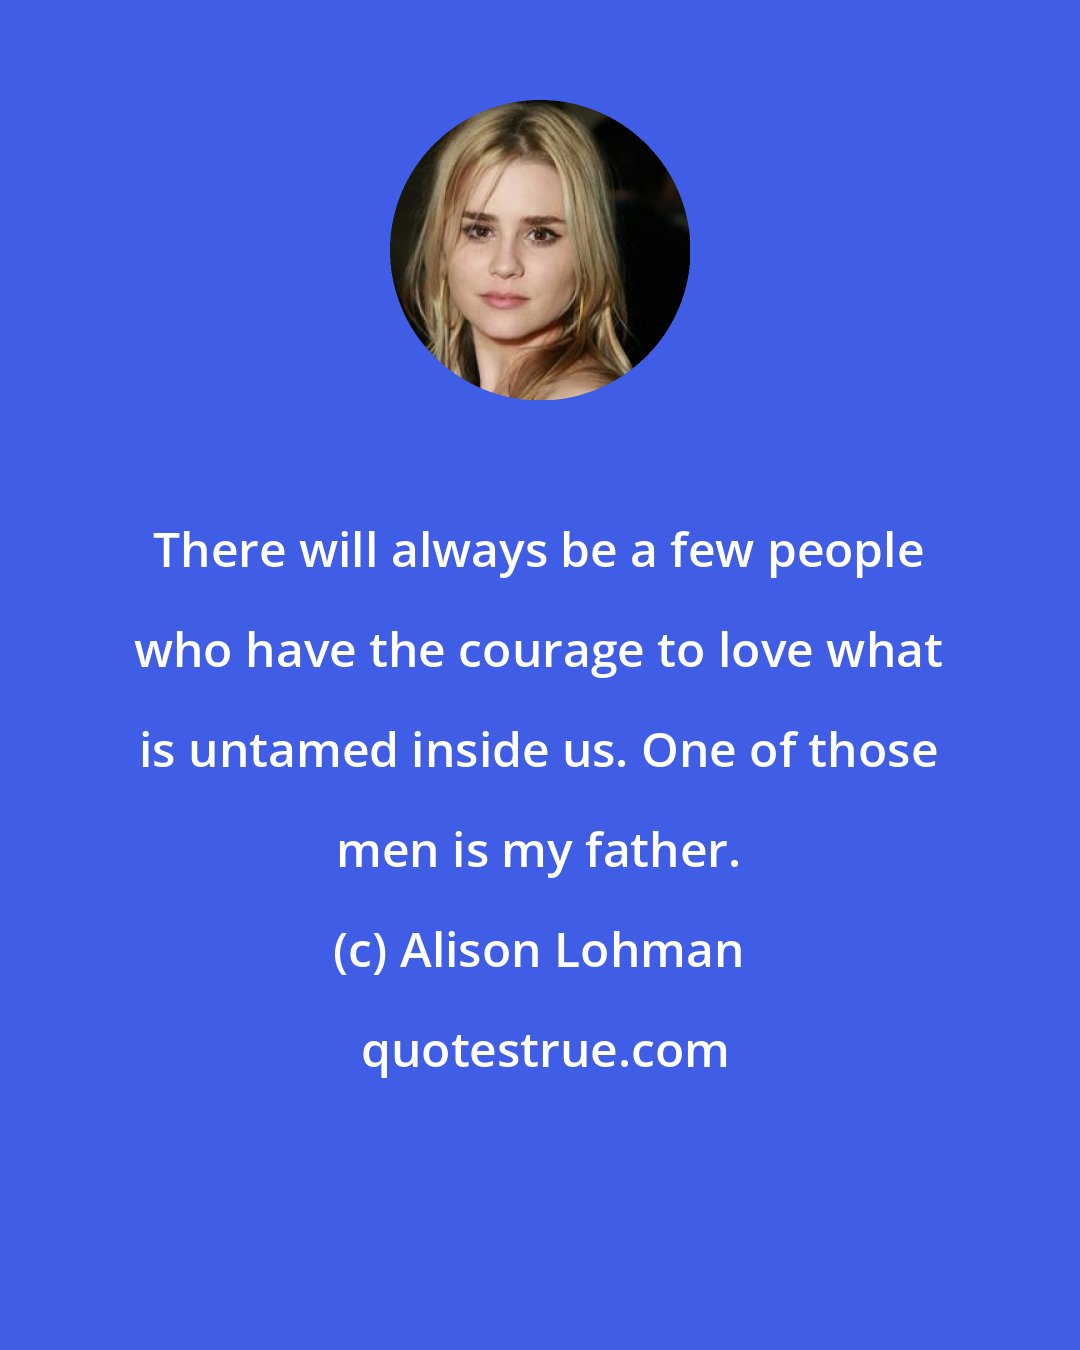 Alison Lohman: There will always be a few people who have the courage to love what is untamed inside us. One of those men is my father.